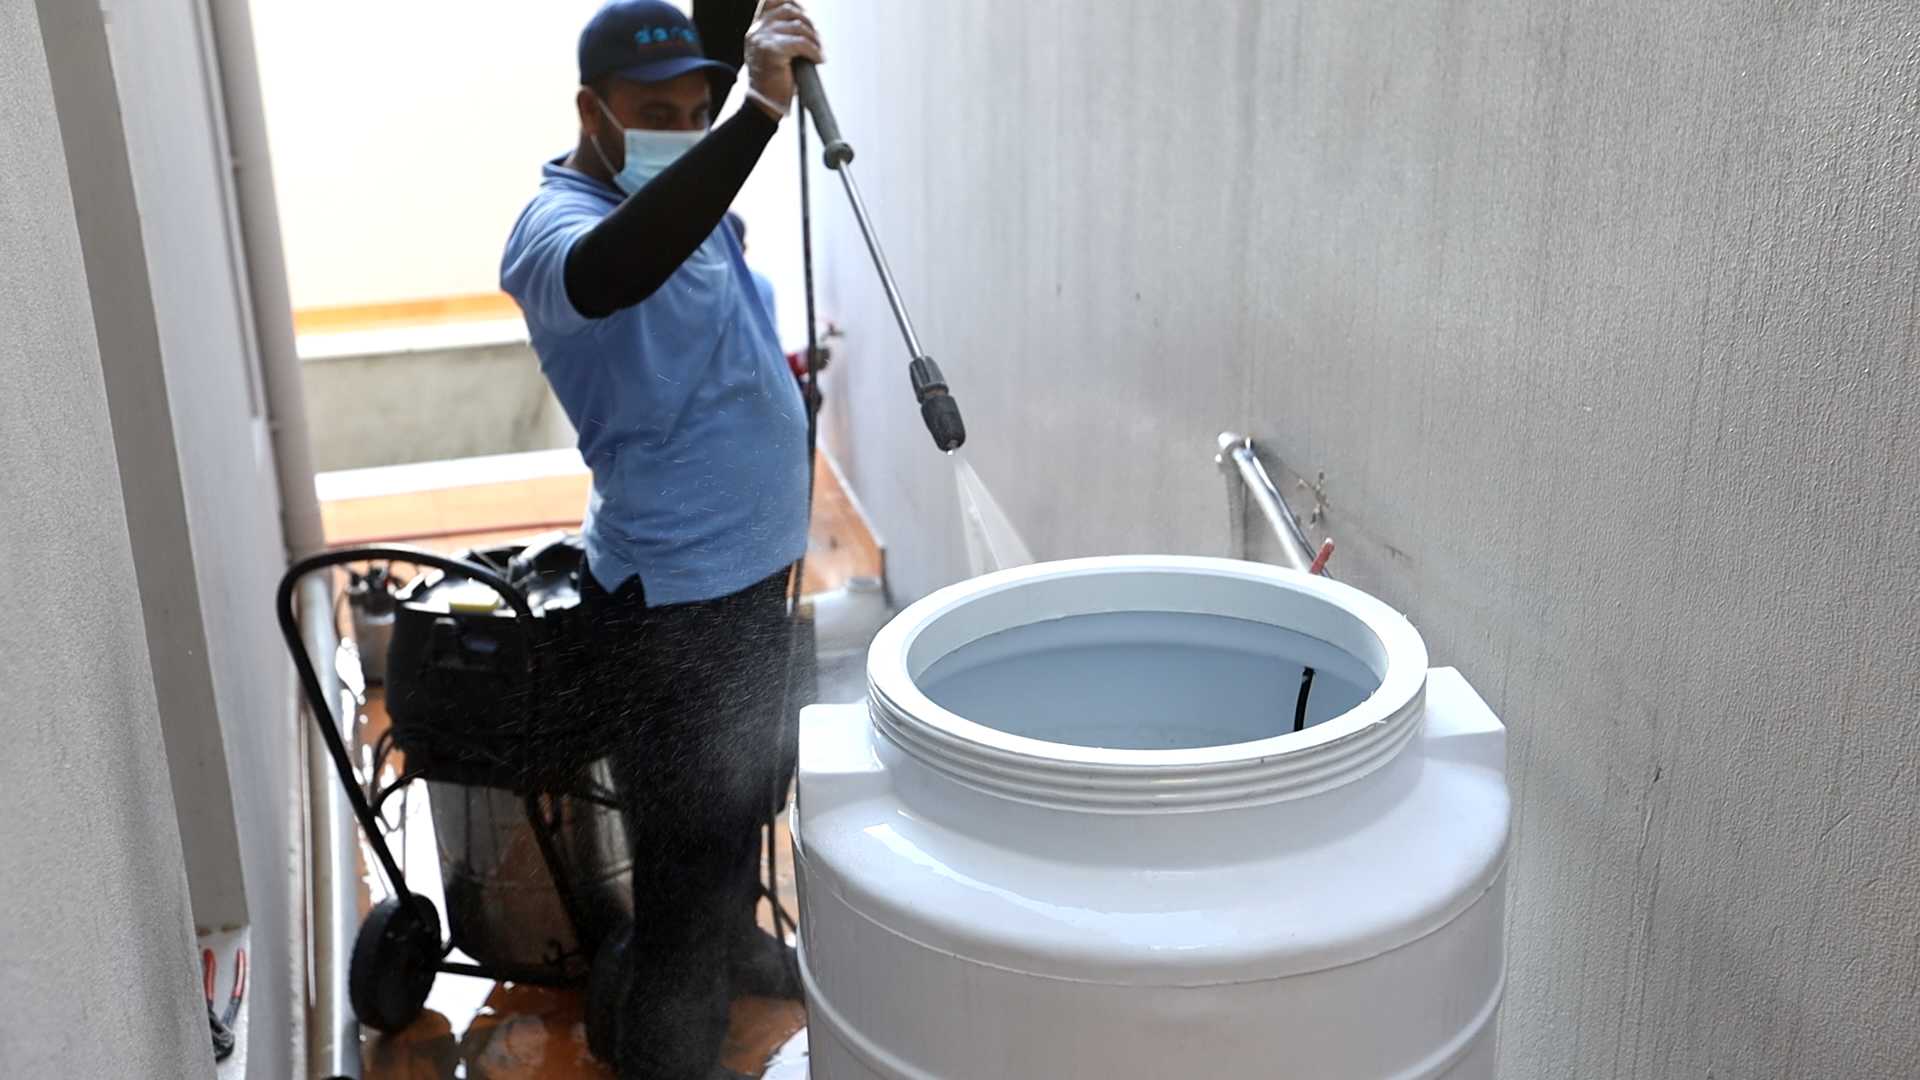 Book Water Tanks Cleaning & Uv Sanitizing | Up To 2000 L Online | Construction Finishes | Qetaat.com